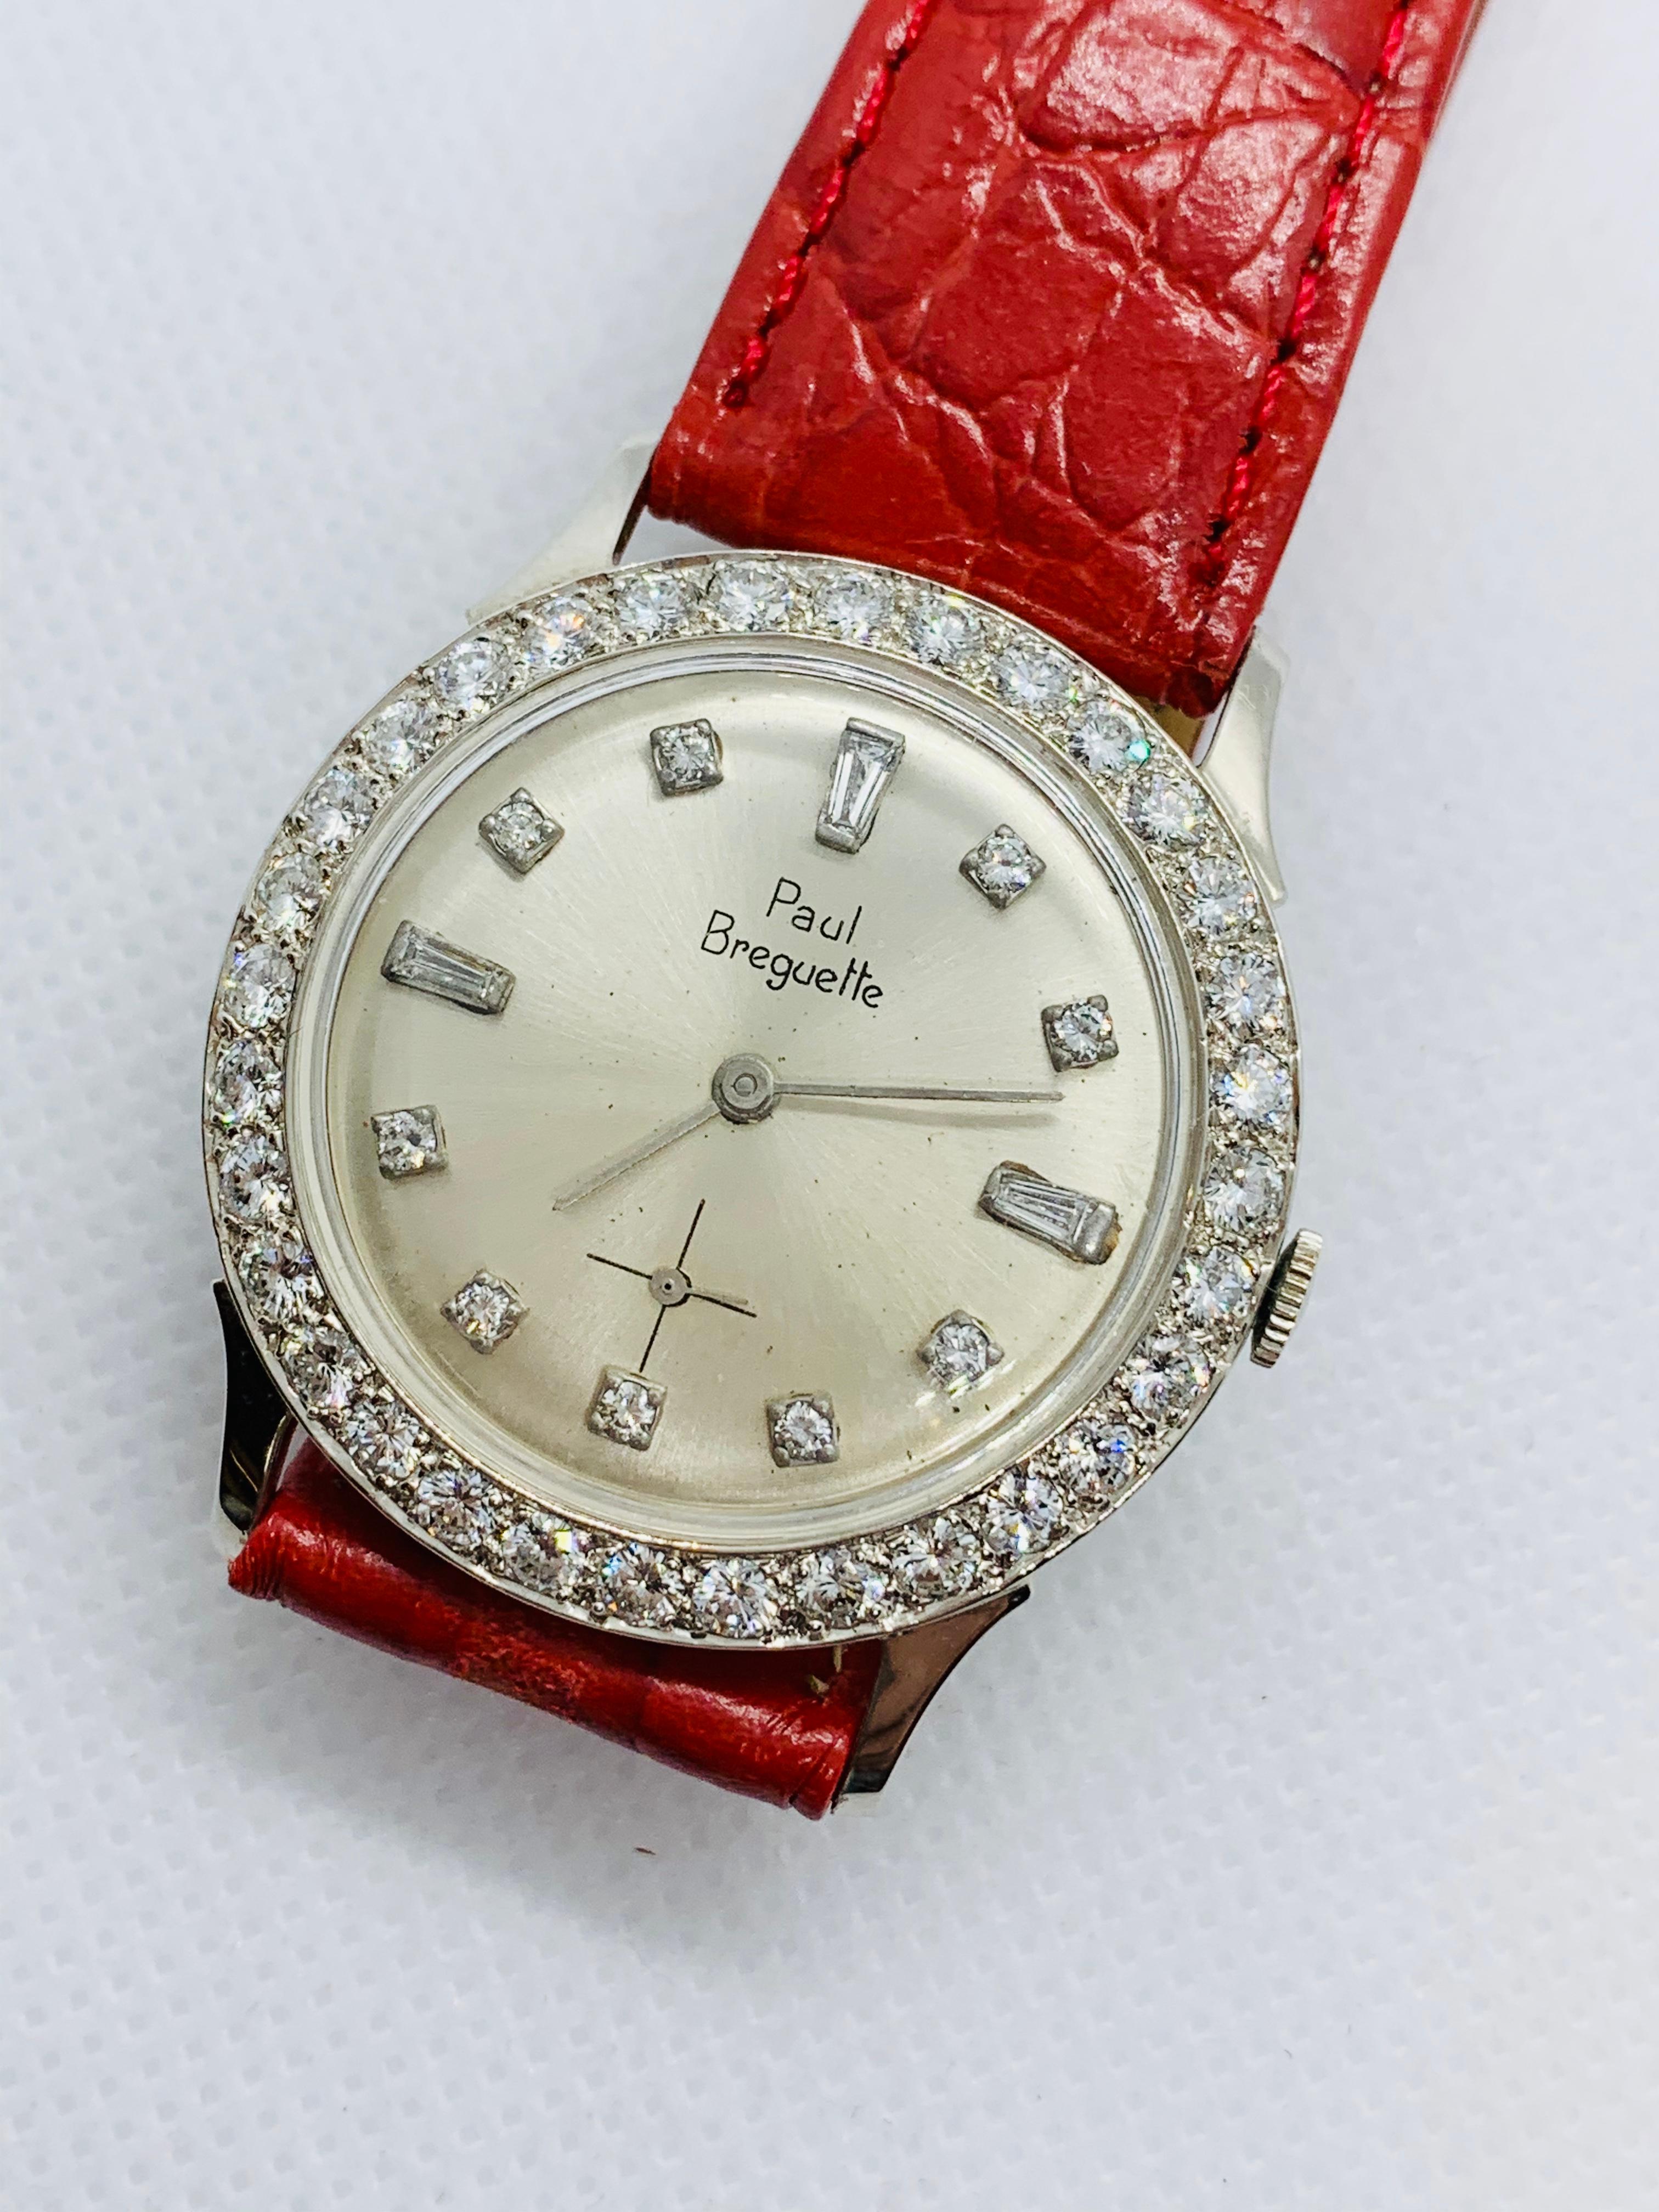 This is an absolutely stunning tuxedo watch! This estate piece is made in 14k White Gold. It is 33 mm in diameter and has a champagne colored dial with diamond markers as well as a diamond bezel. It has manual wind movement. The red leather band is